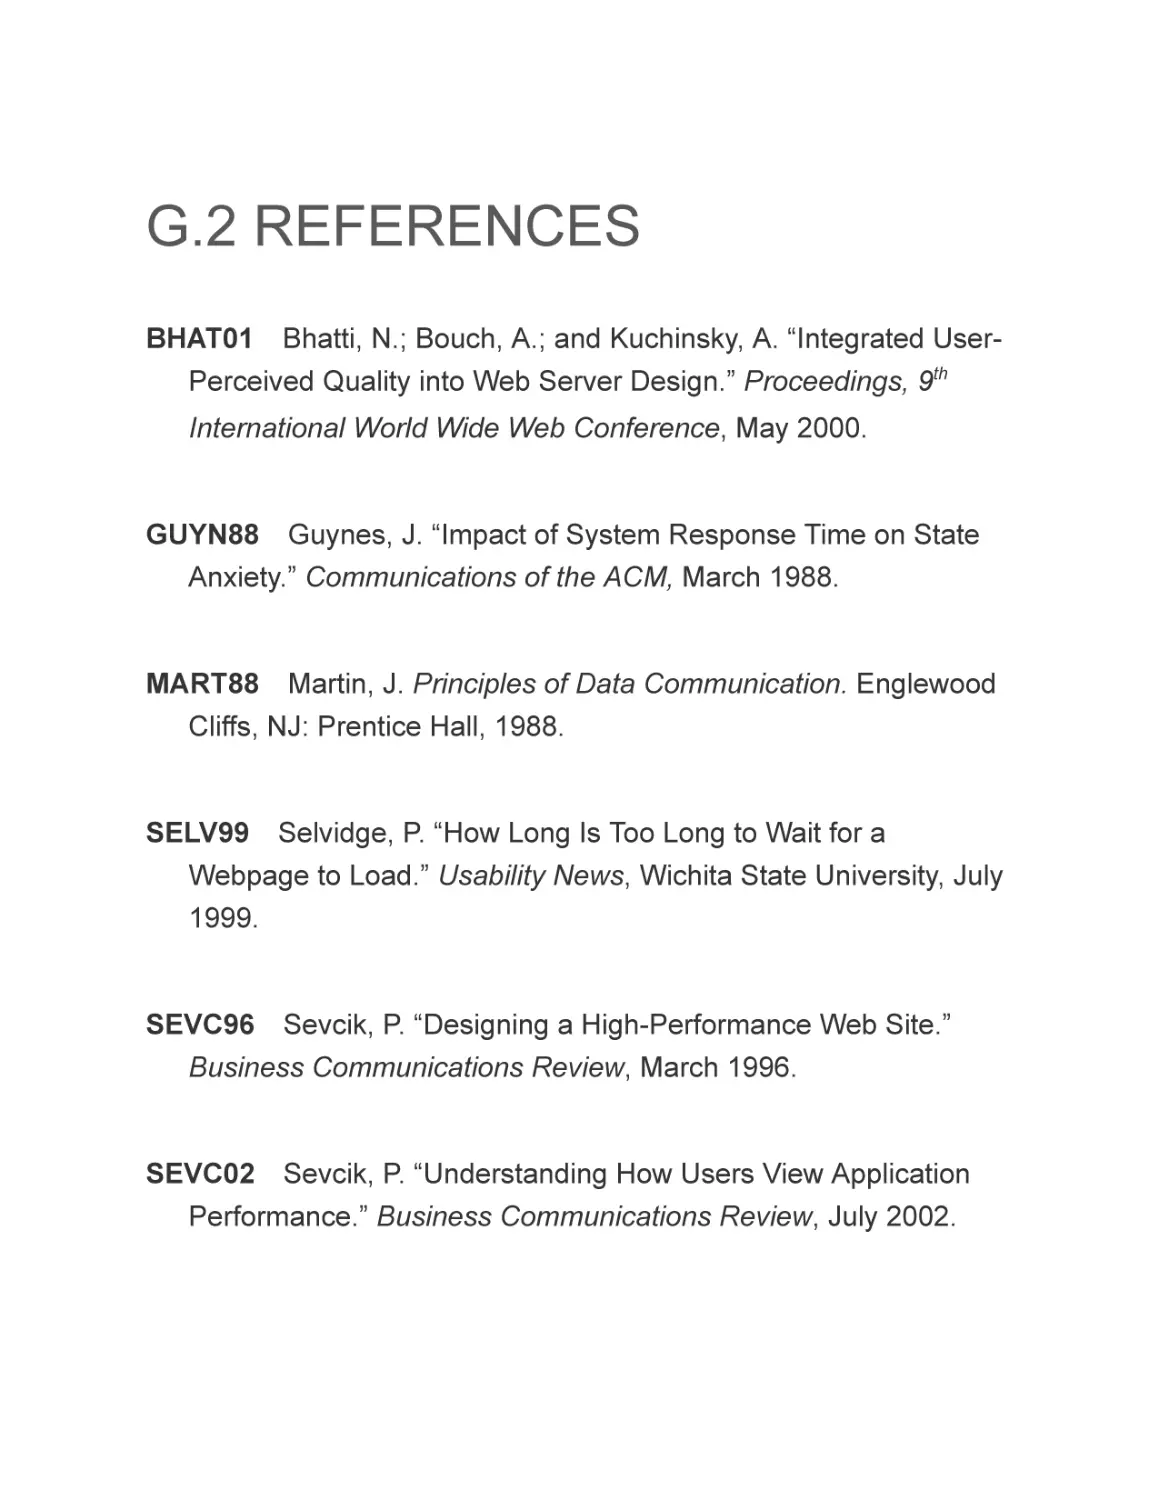 G.2 REFERENCES